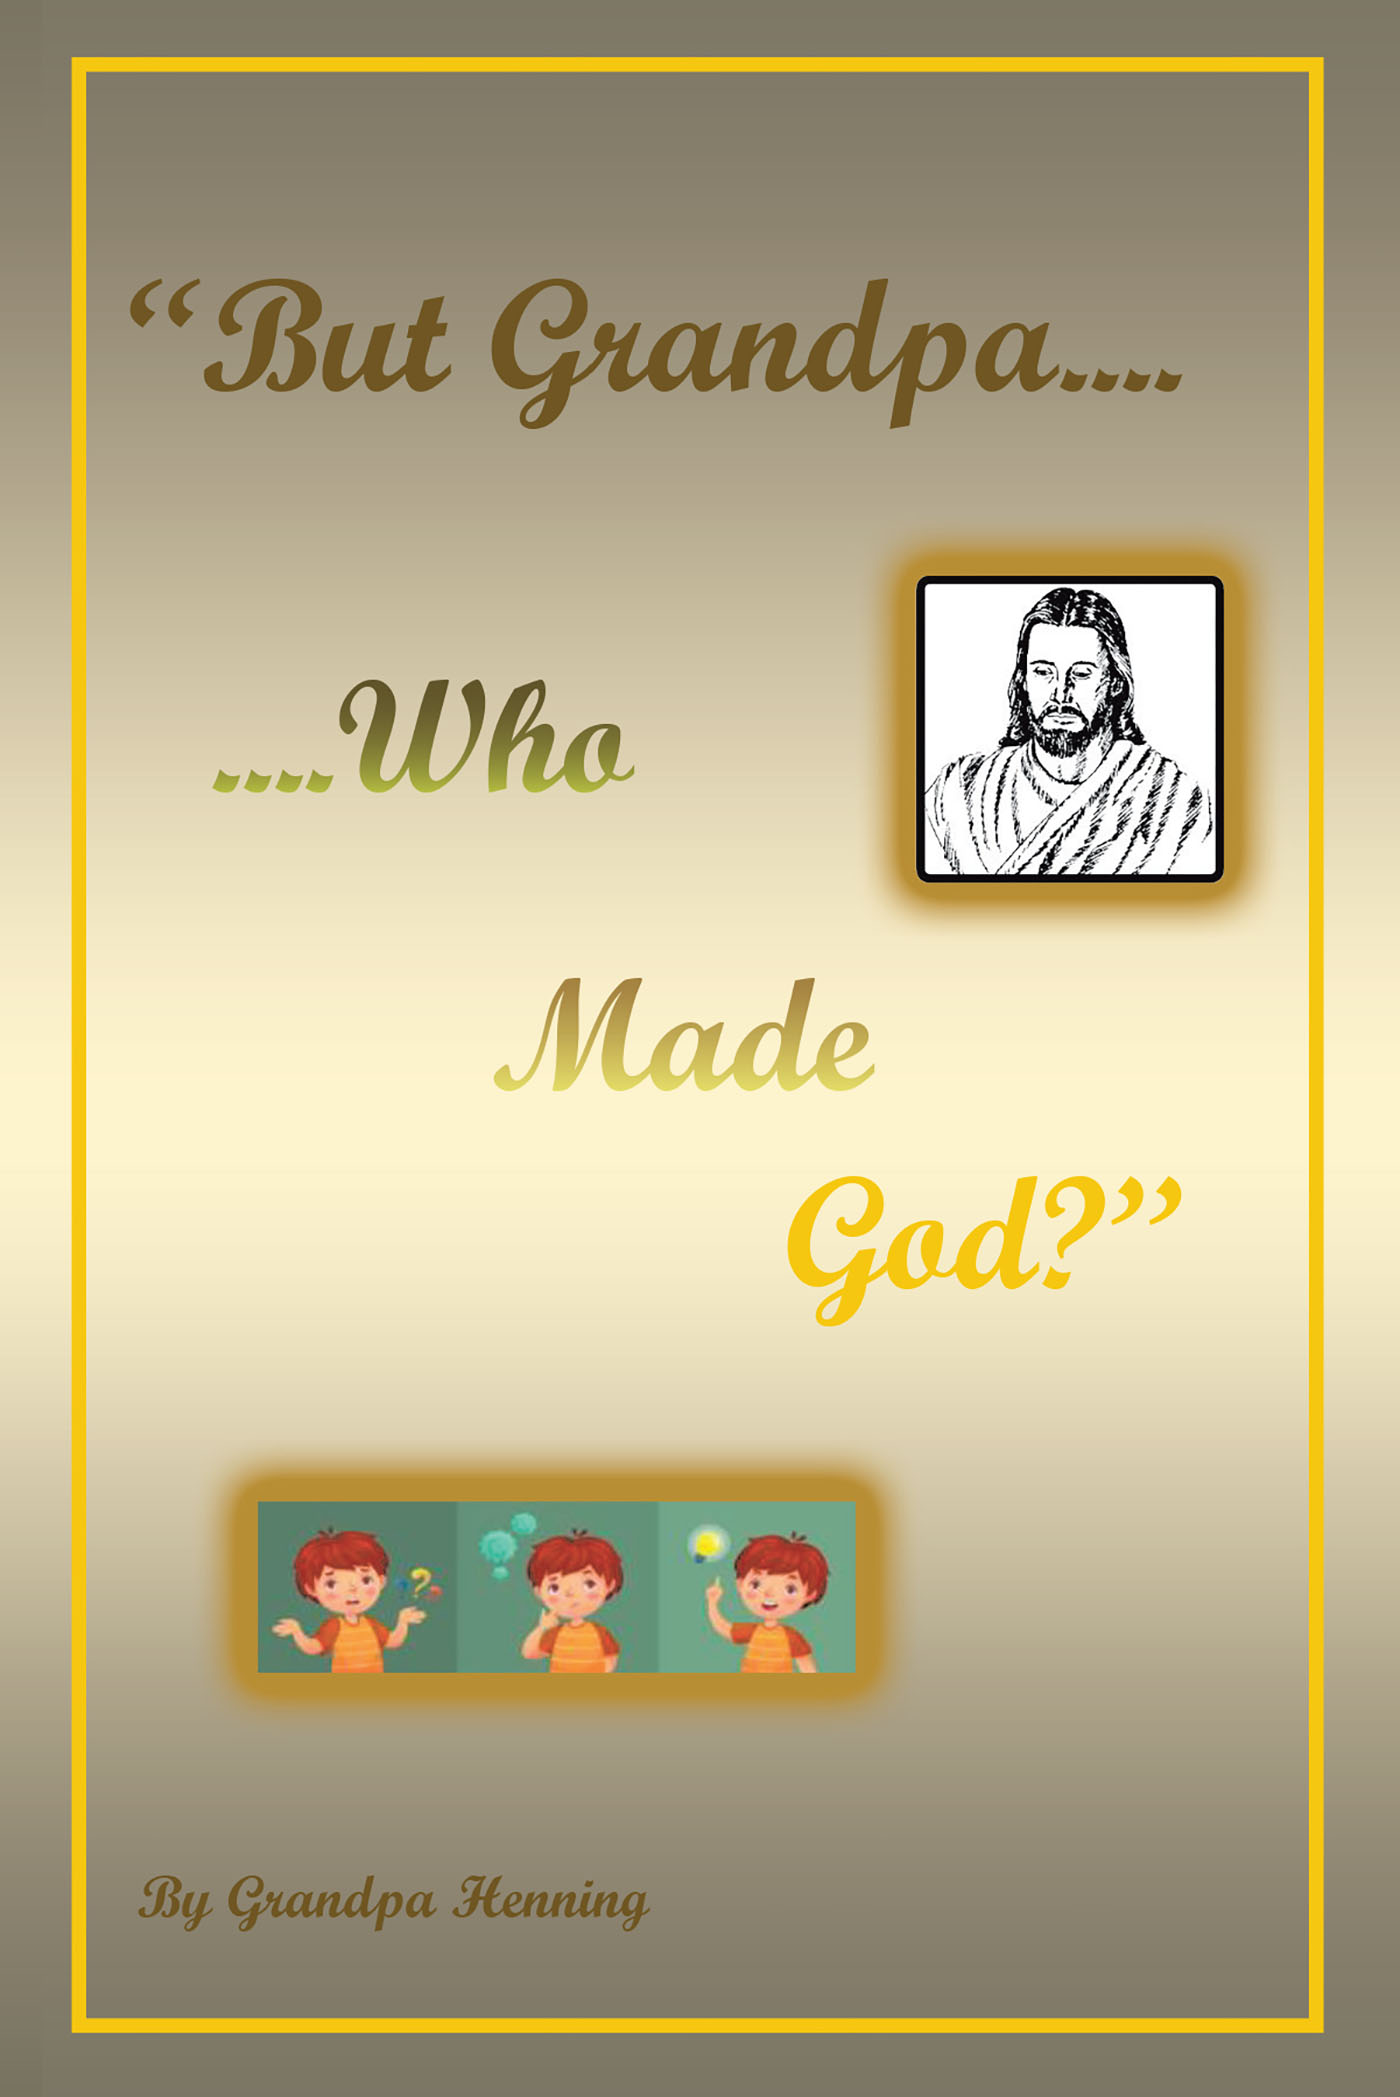 Author Grandpa Henning’s New Book, “‘But Grandpa....Who Made God?’” Explores a Faith-Based Conversation Had Between the Author and His Grandson About God’s Origins